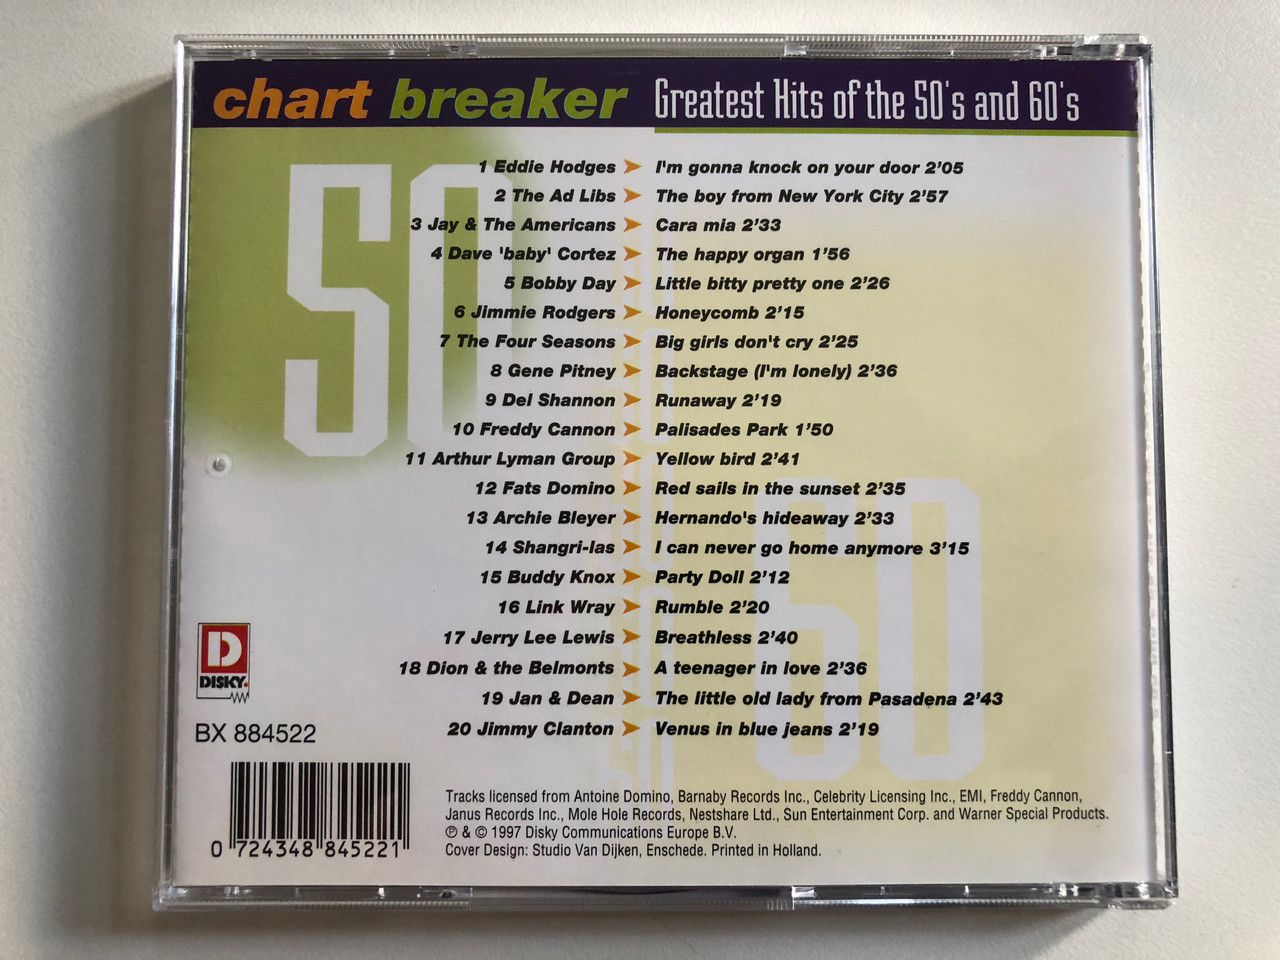 https://cdn10.bigcommerce.com/s-62bdpkt7pb/products/0/images/313467/Chart_Breaker_Greatest_Hits_Of_The_50s_And_60s_CD_2_-_Eddie_Hodges_-_Im_Gonna_Knock_On_Your_Door_Jimmy_Clanton_-_Venus_In_Blue_Jeans_Fats_Domino_-_Red_Sails_In_The_Sunset_The_Four__48446.1700840380.1280.1280.JPG?c=2